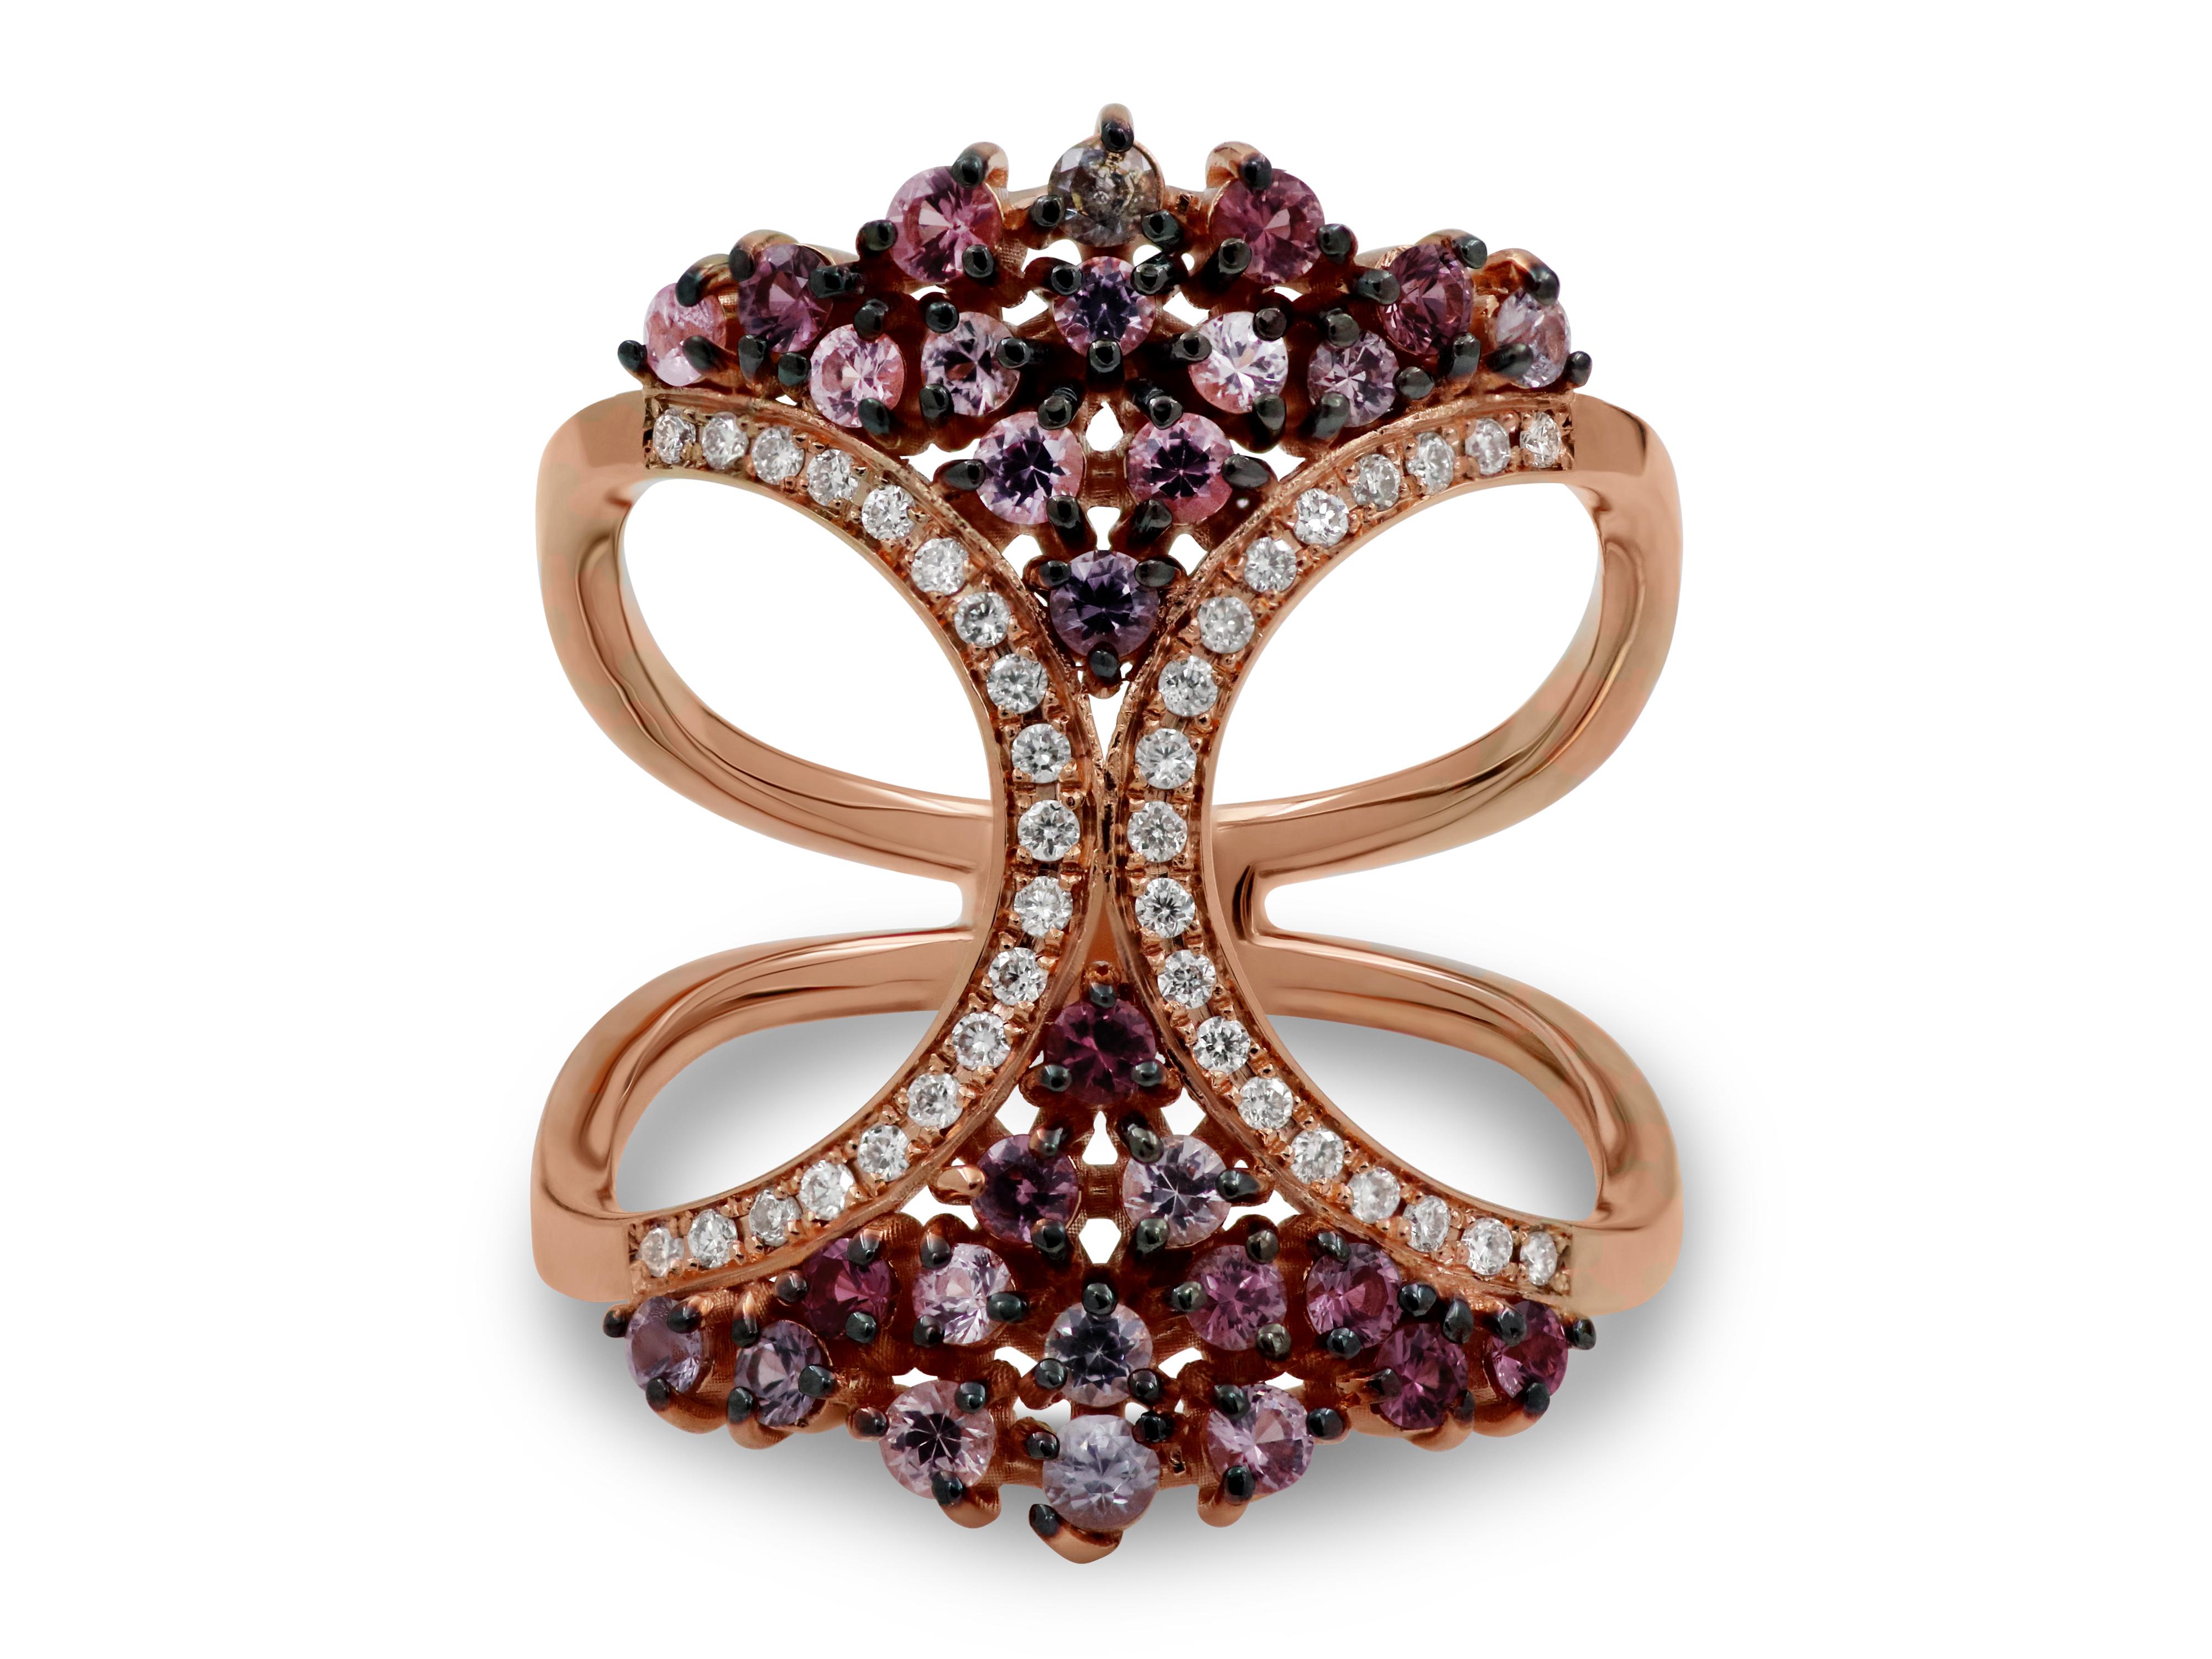 Exquisite 18k rose gold ring with 0.76 carats spinel and 0.16 carats brilliant cut diamonds.